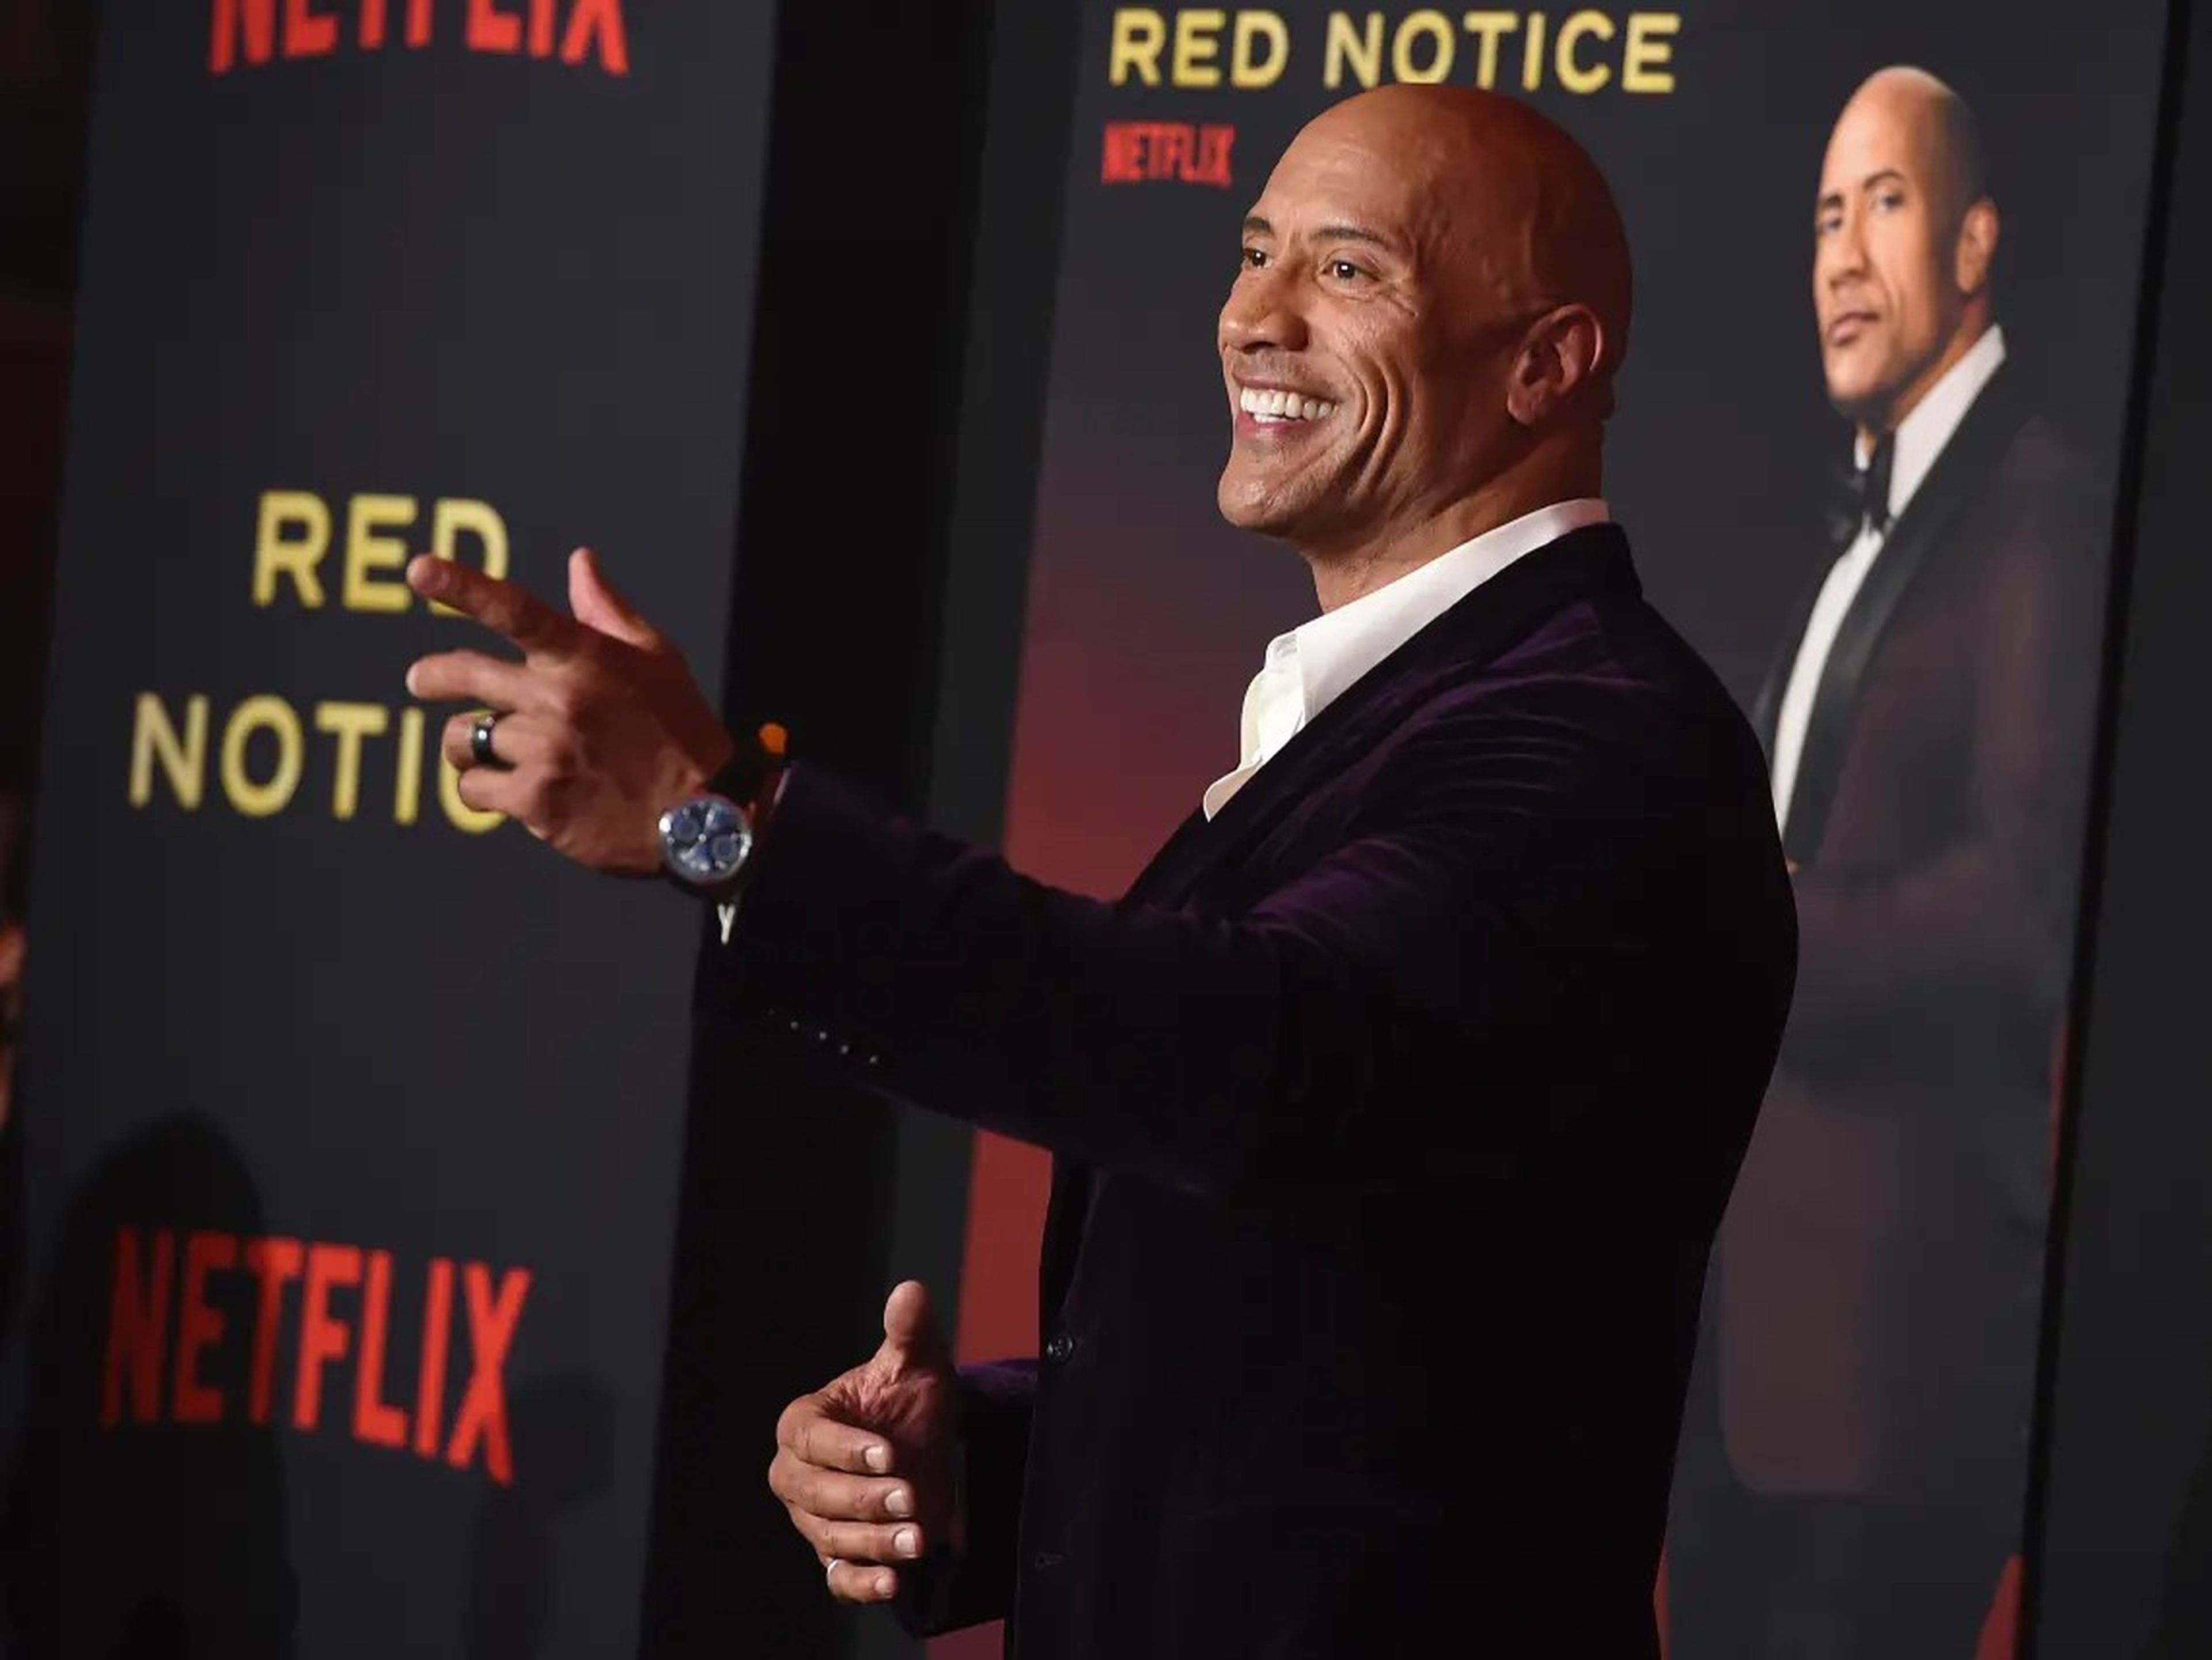 Actor Dwayne "The Rock" Johnson at the premier of his film "Red Notice" on Netflix